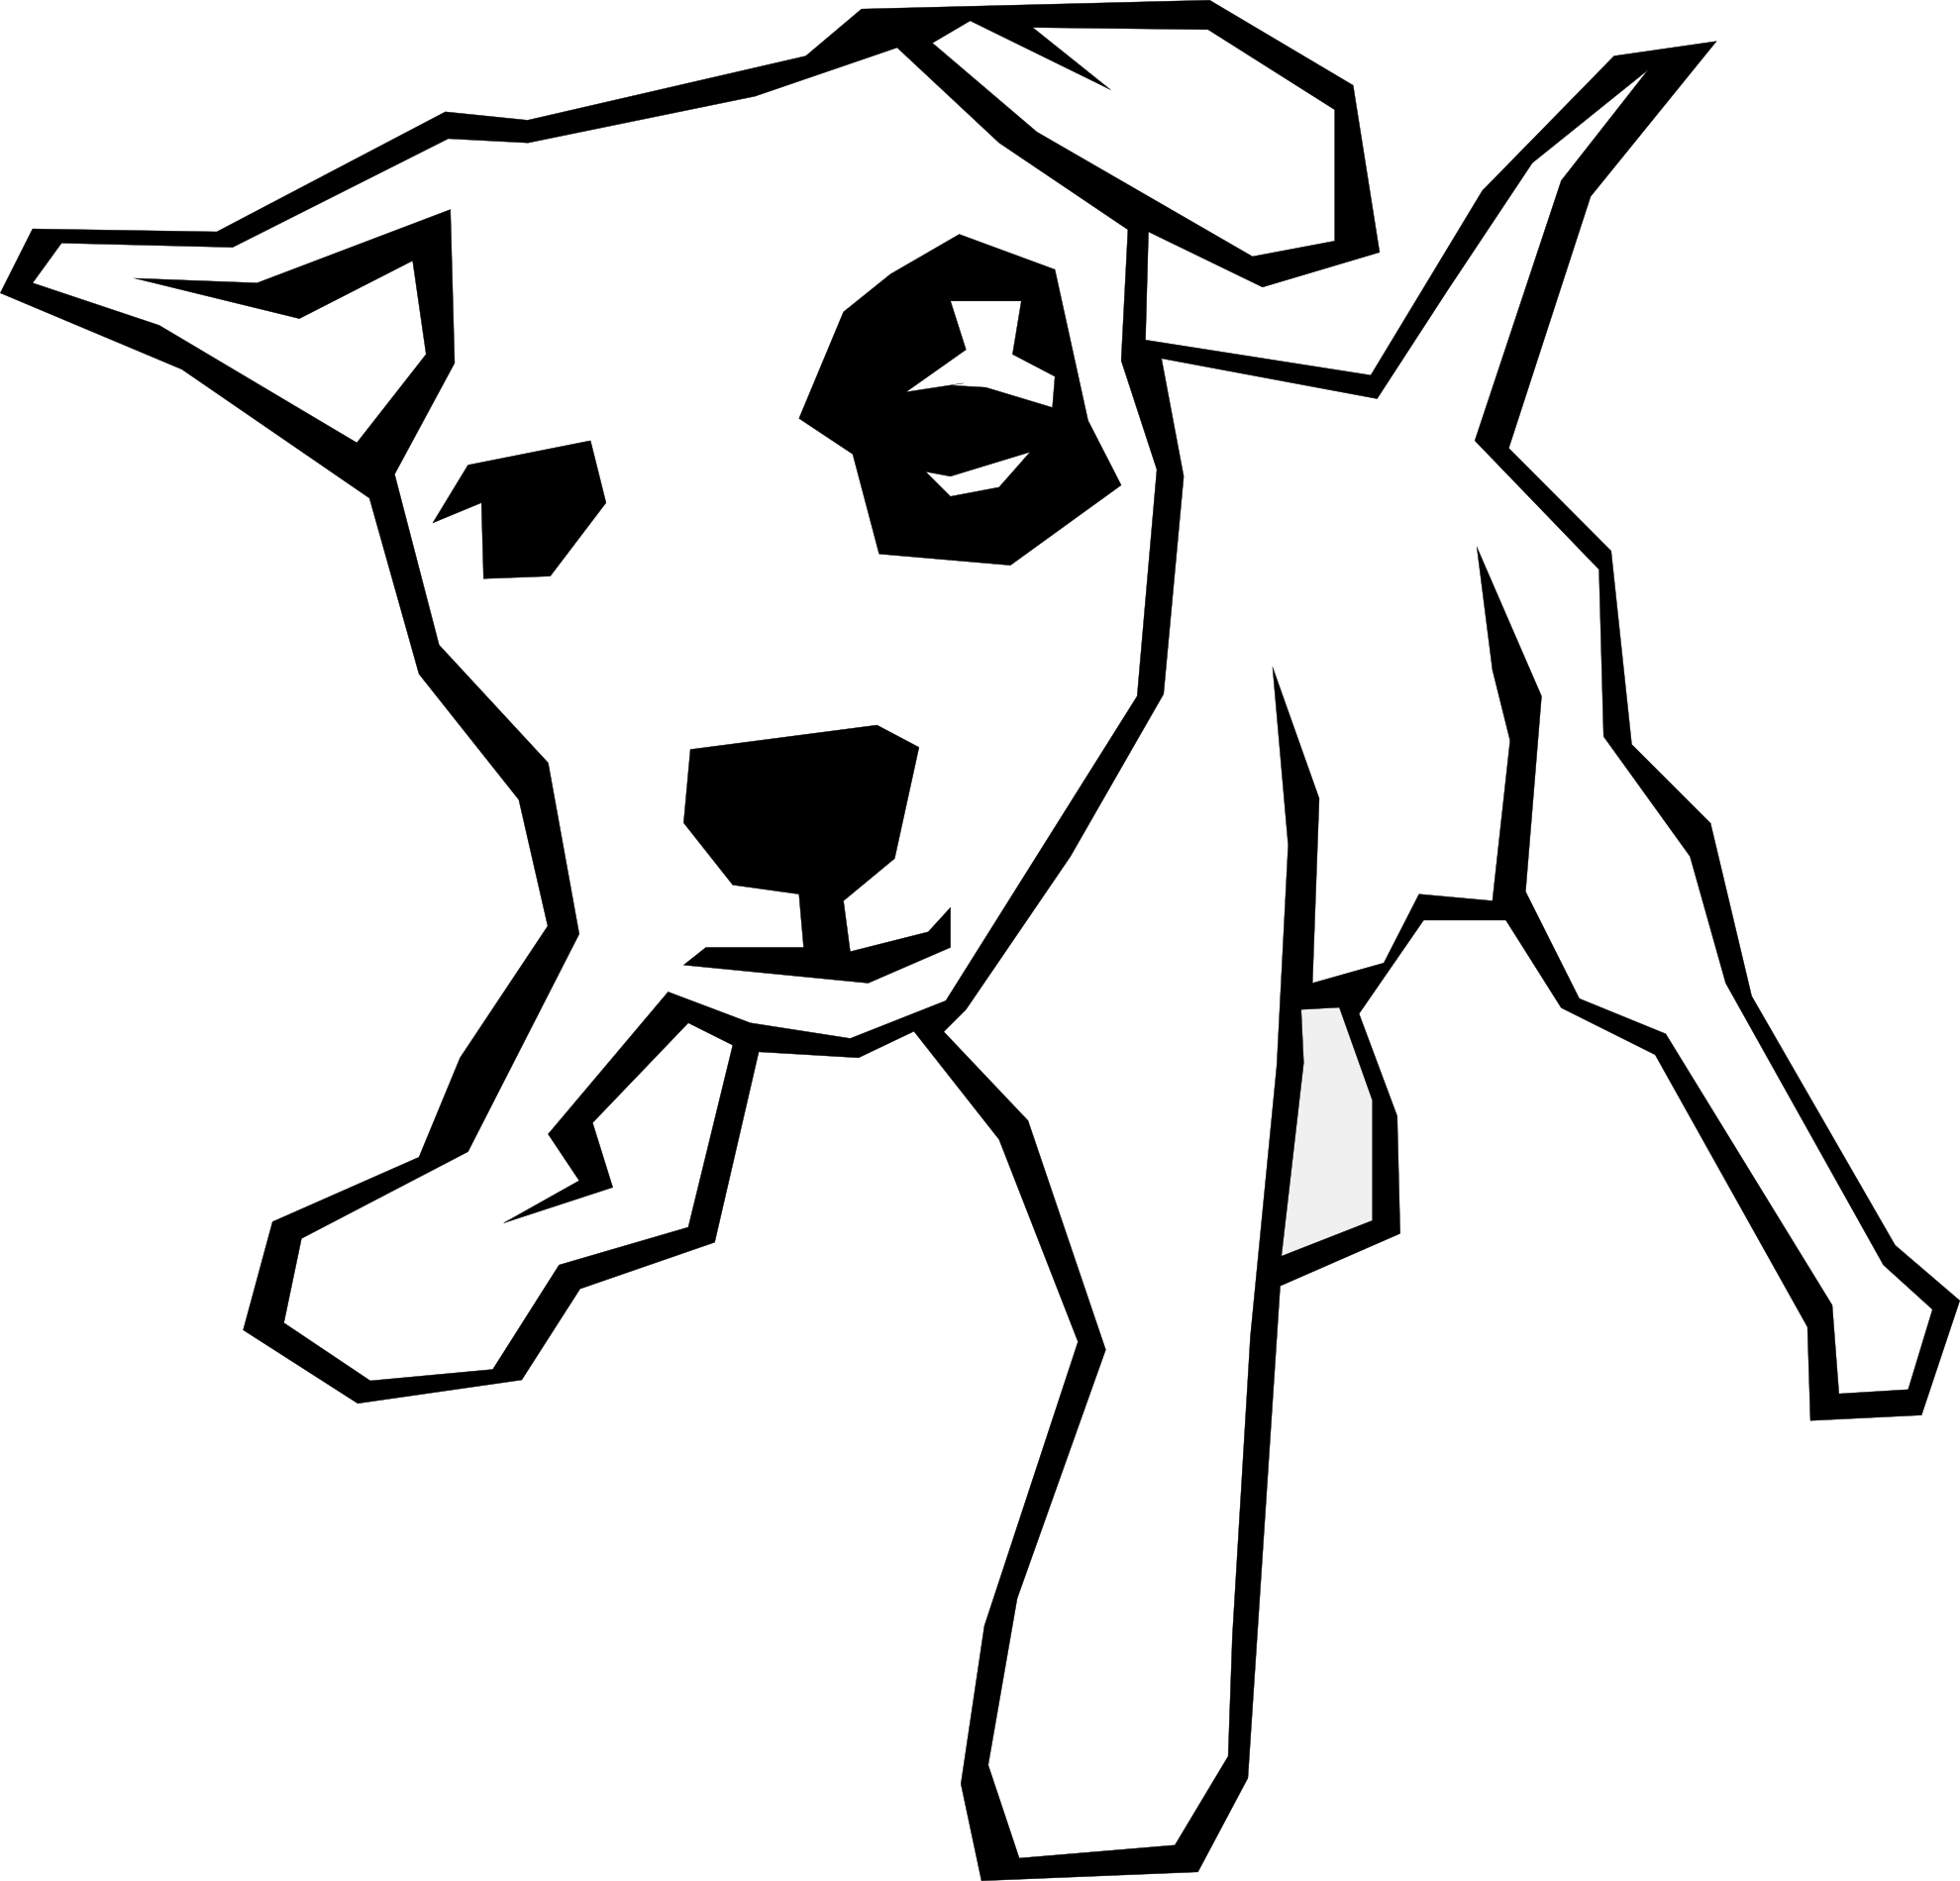 Dog  black and white dog clip art black and white free clipart images 6